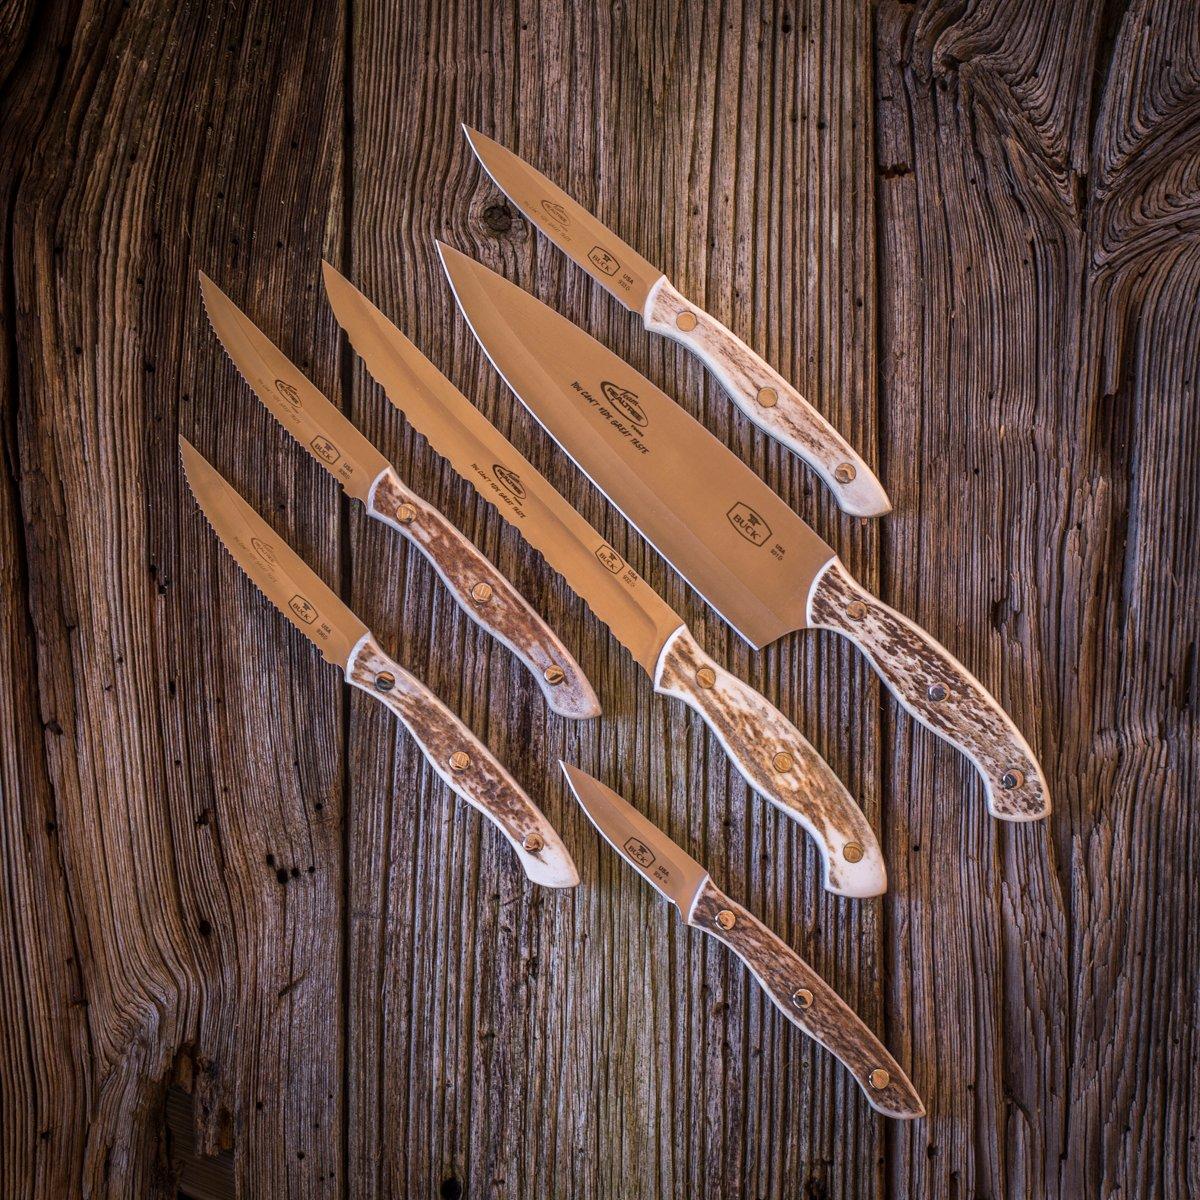 Genuine elk antler handles make a striking display on any kitchen counter. (All photos by Bill Konway)